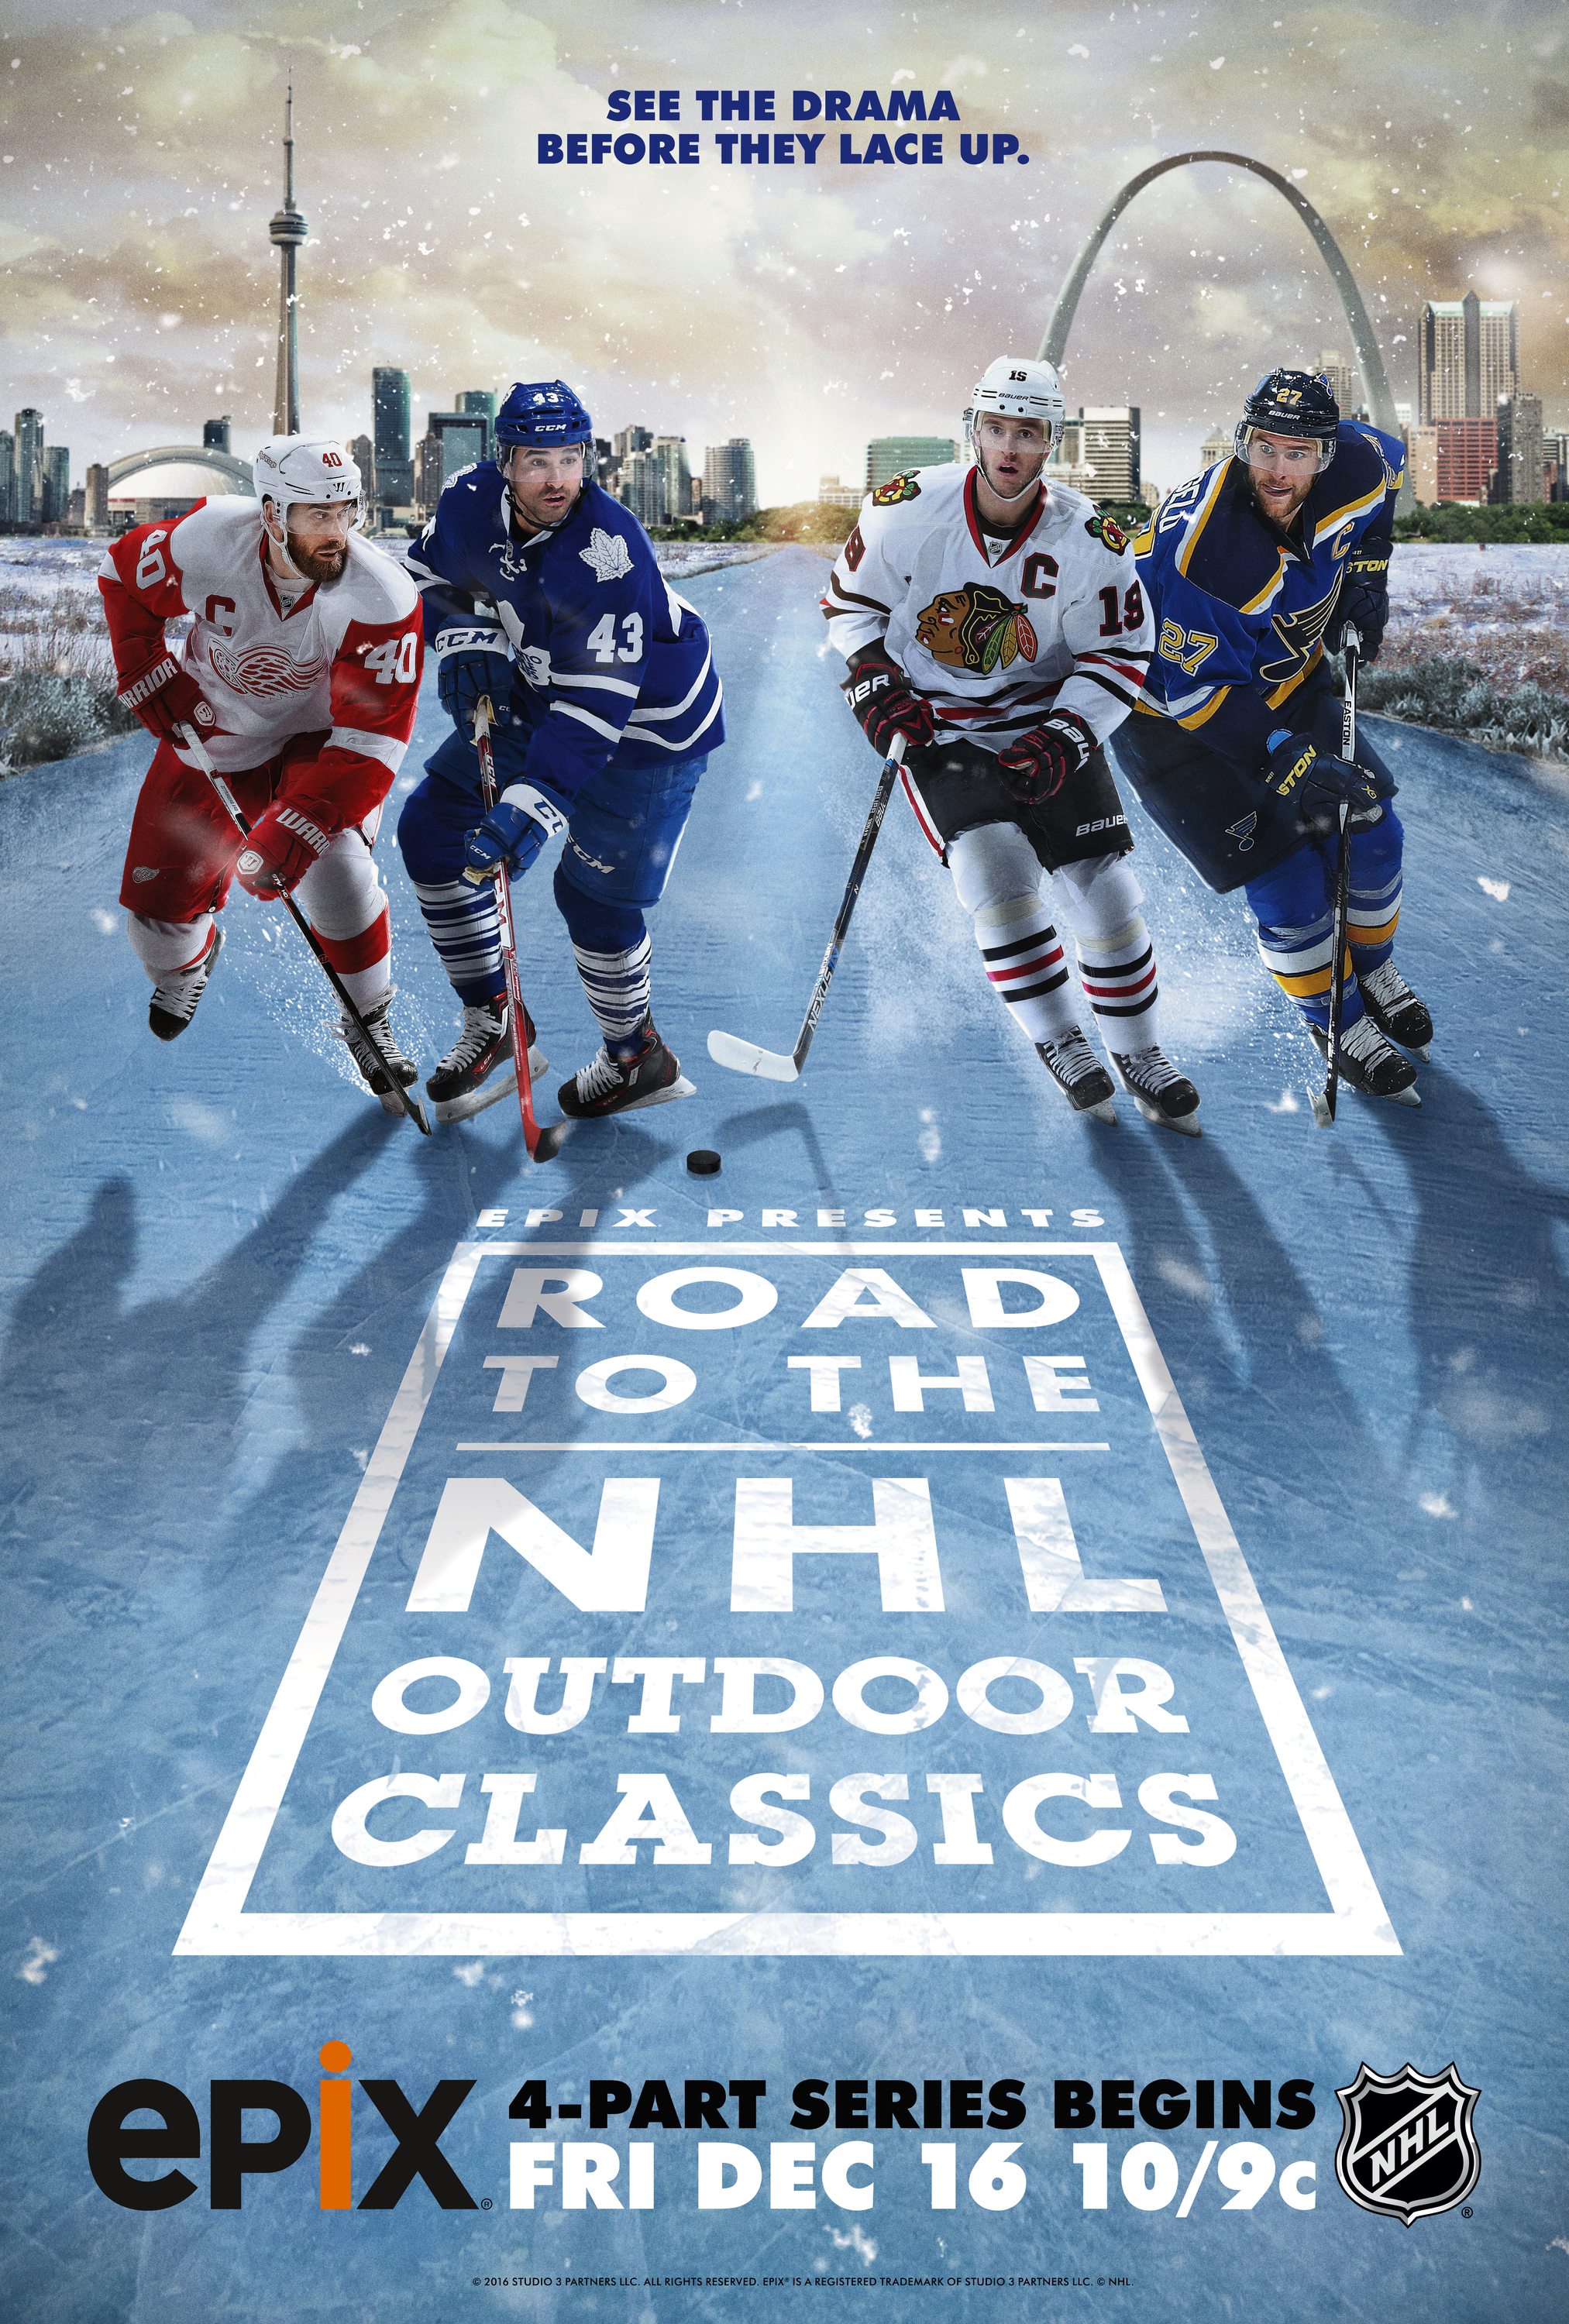 EPIX Presents: Road To the NHL Outdoor 